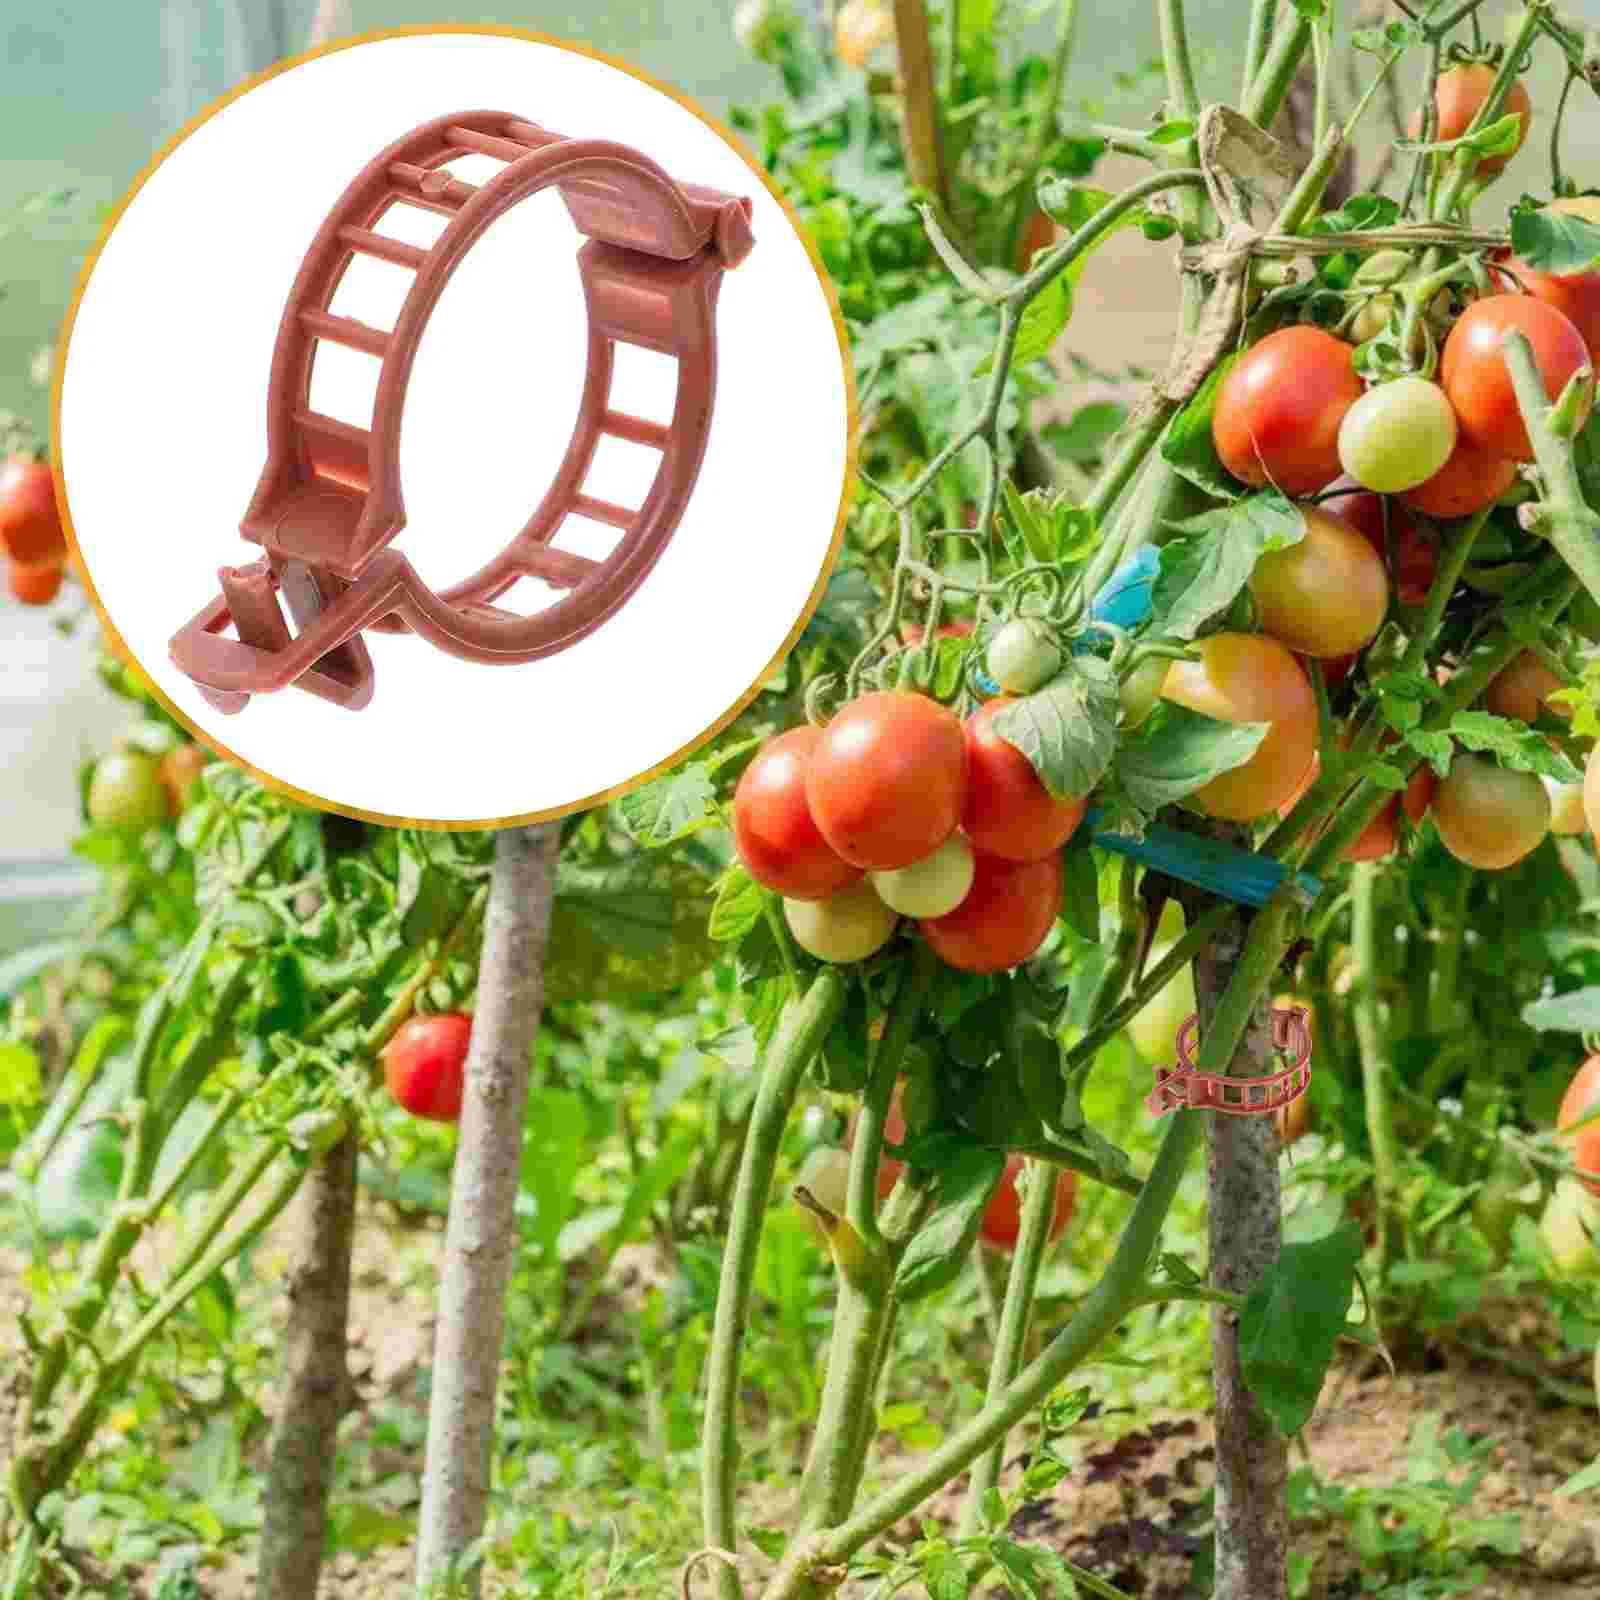 

100 Pcs Clips Supports Plastic Gardening Stand Mild Tomato Vine Fixing Greenhouse Flower Tools equipment